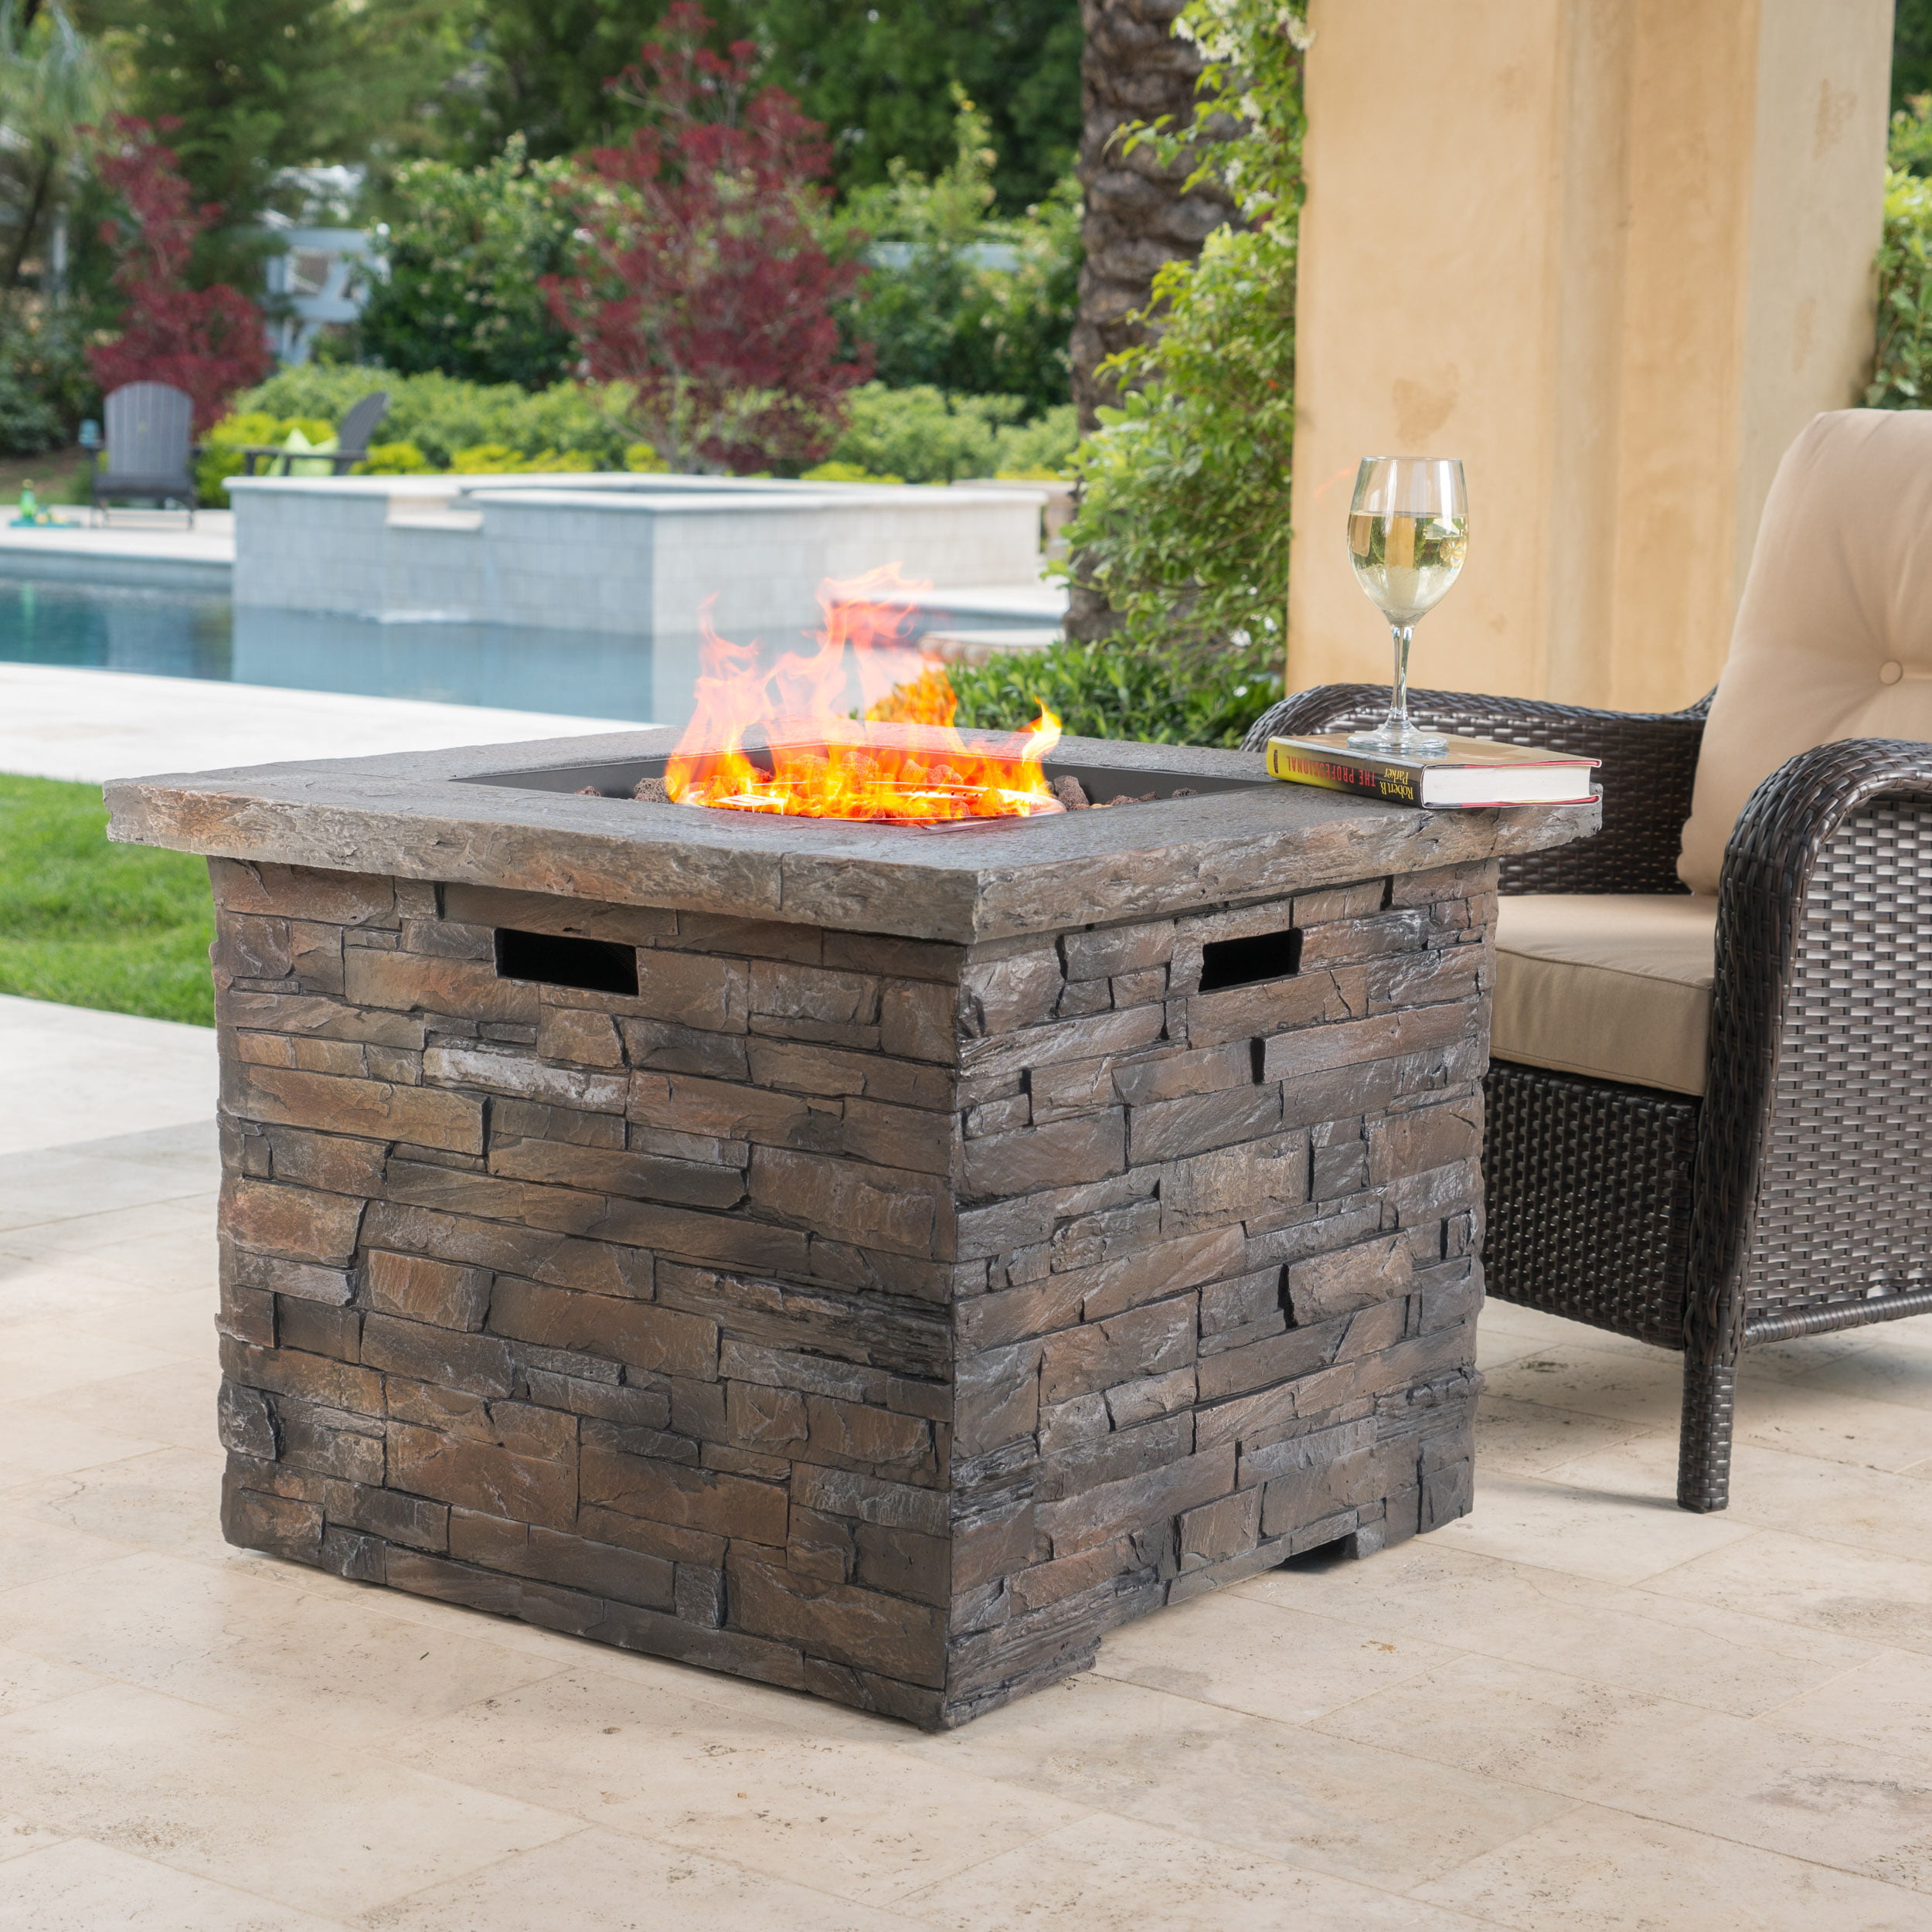 Loene Outdoor Square Fire Pit Natural Stone Finish